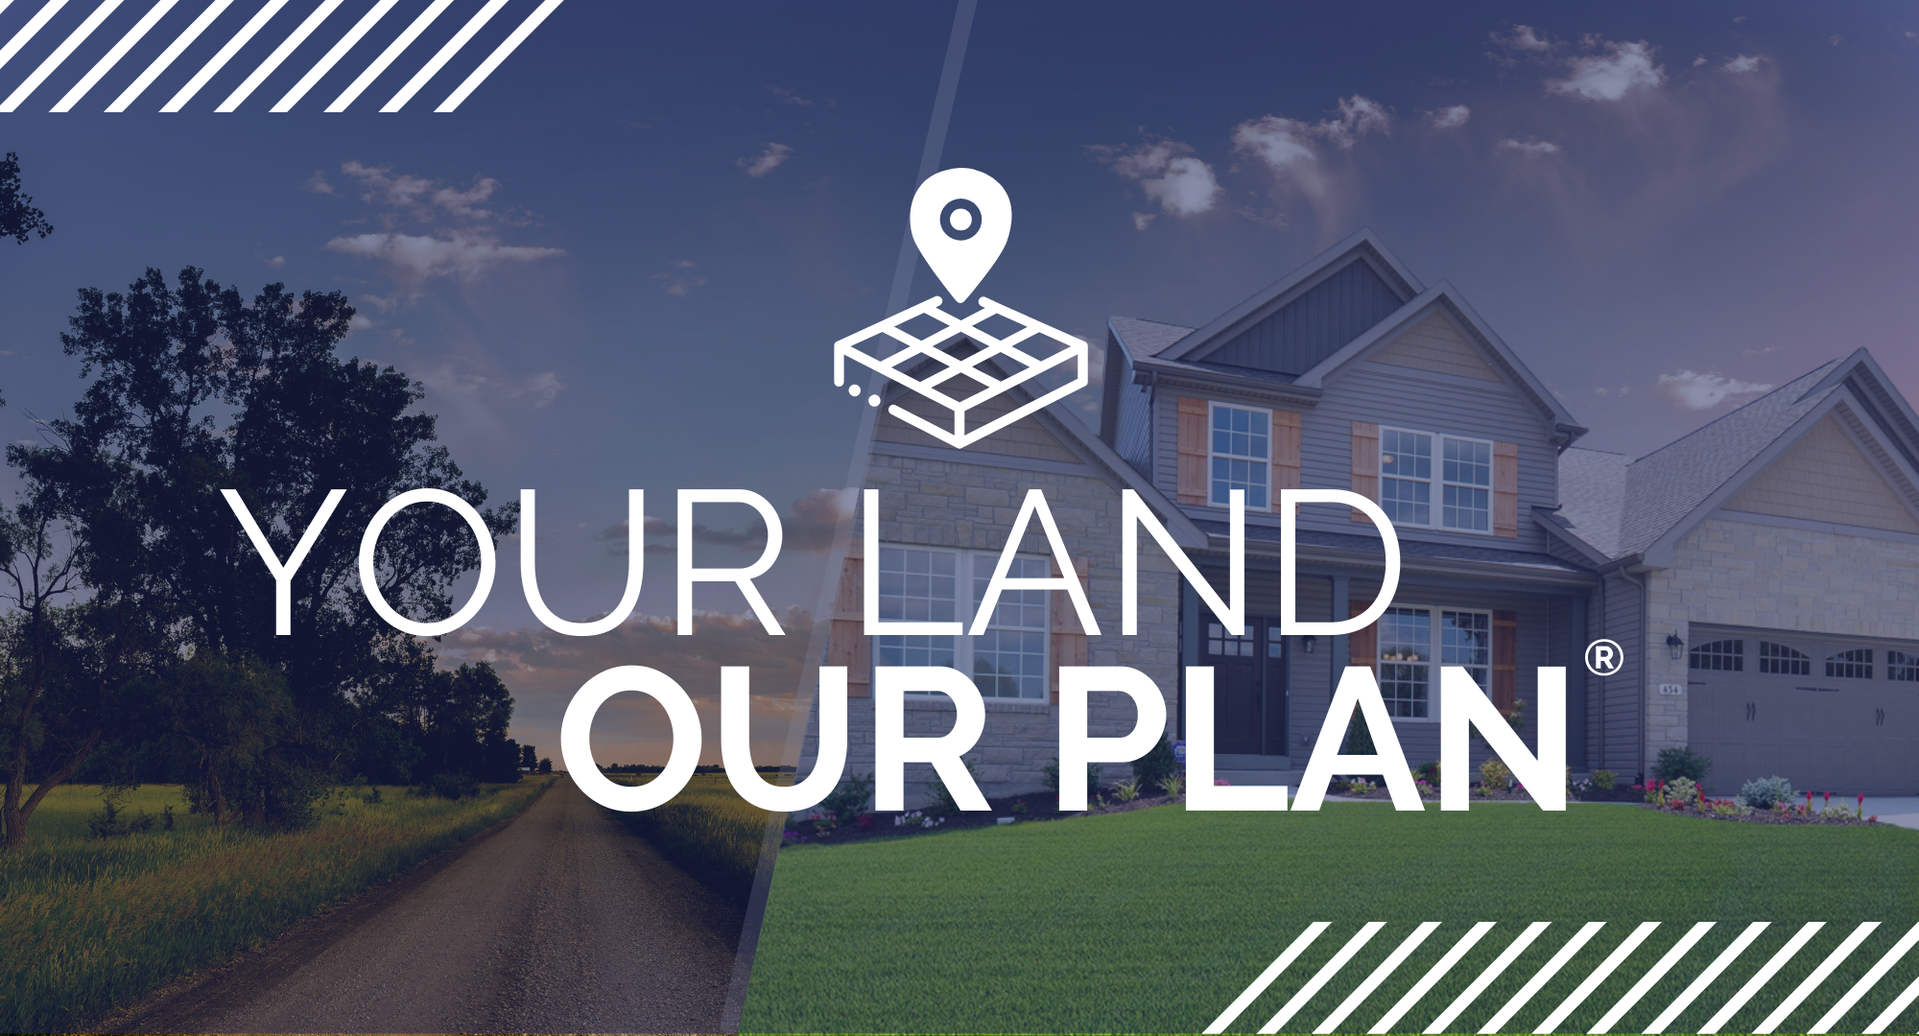 Your Land Our Plan. Your Land Our Plan® New Homes in St. Louis, MO